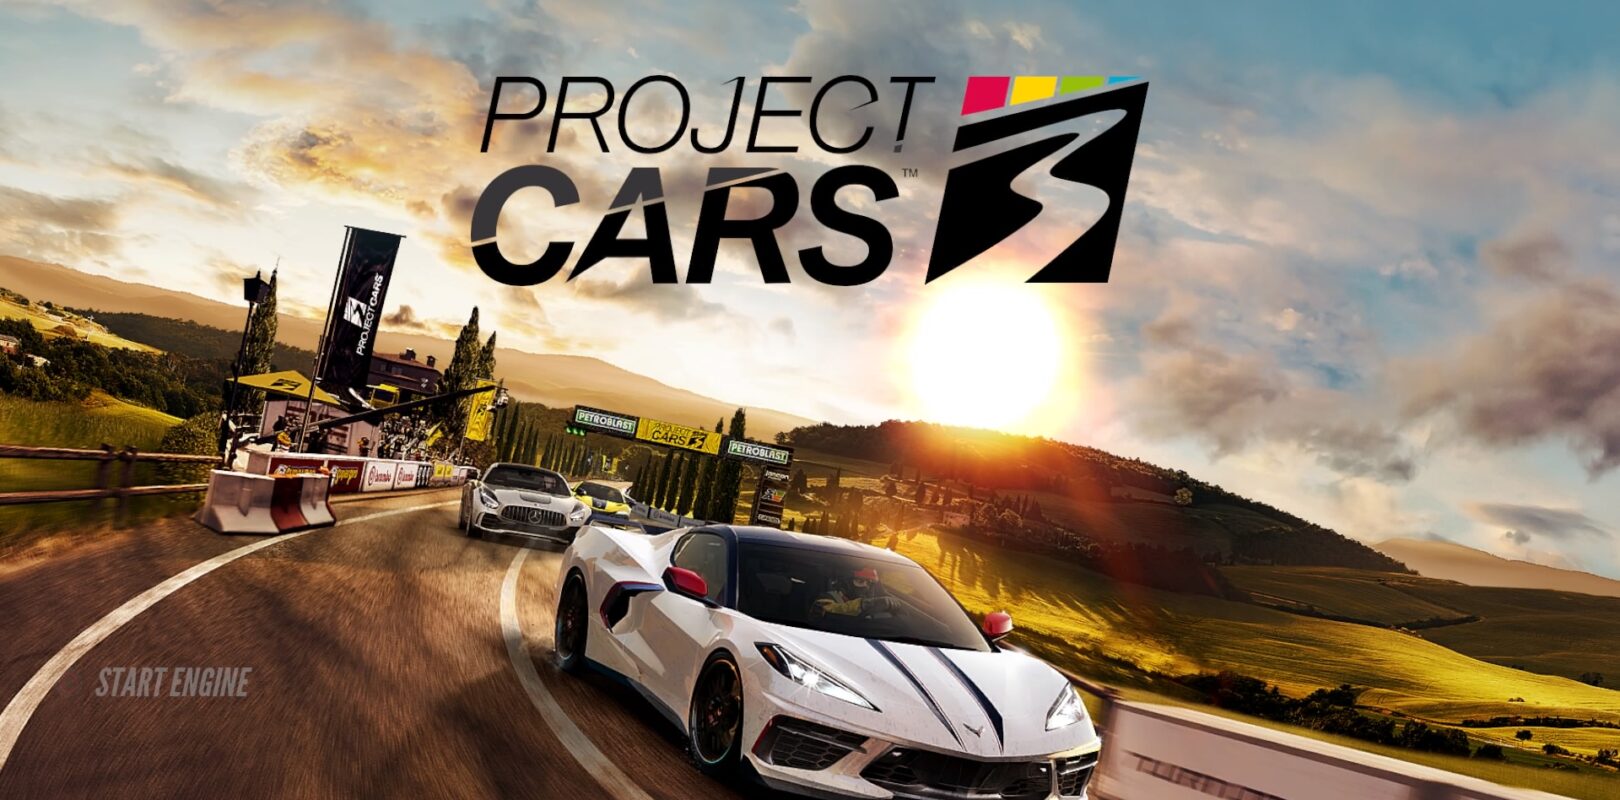 Project CARS 3 PS4 Pro Review - it authentic racer or a complete mess? - AIR Entertainment